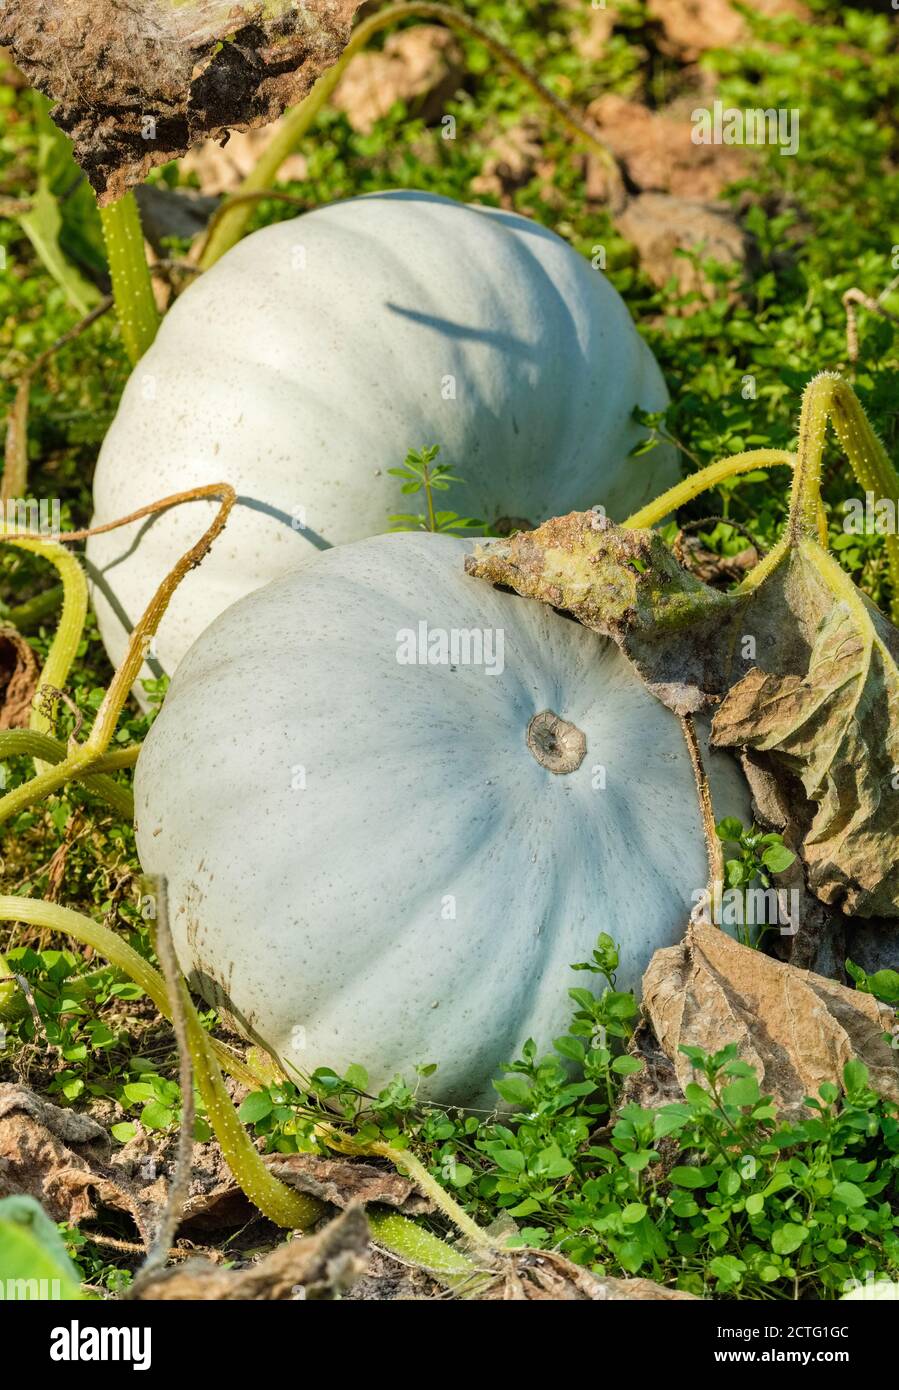 Cucurbita Pepo 'Crown Prince'. Silver-blue skinned pumpkin 'Crown Prince' growing in a vegetable patch. Squash 'Crown Prince'. Stock Photo